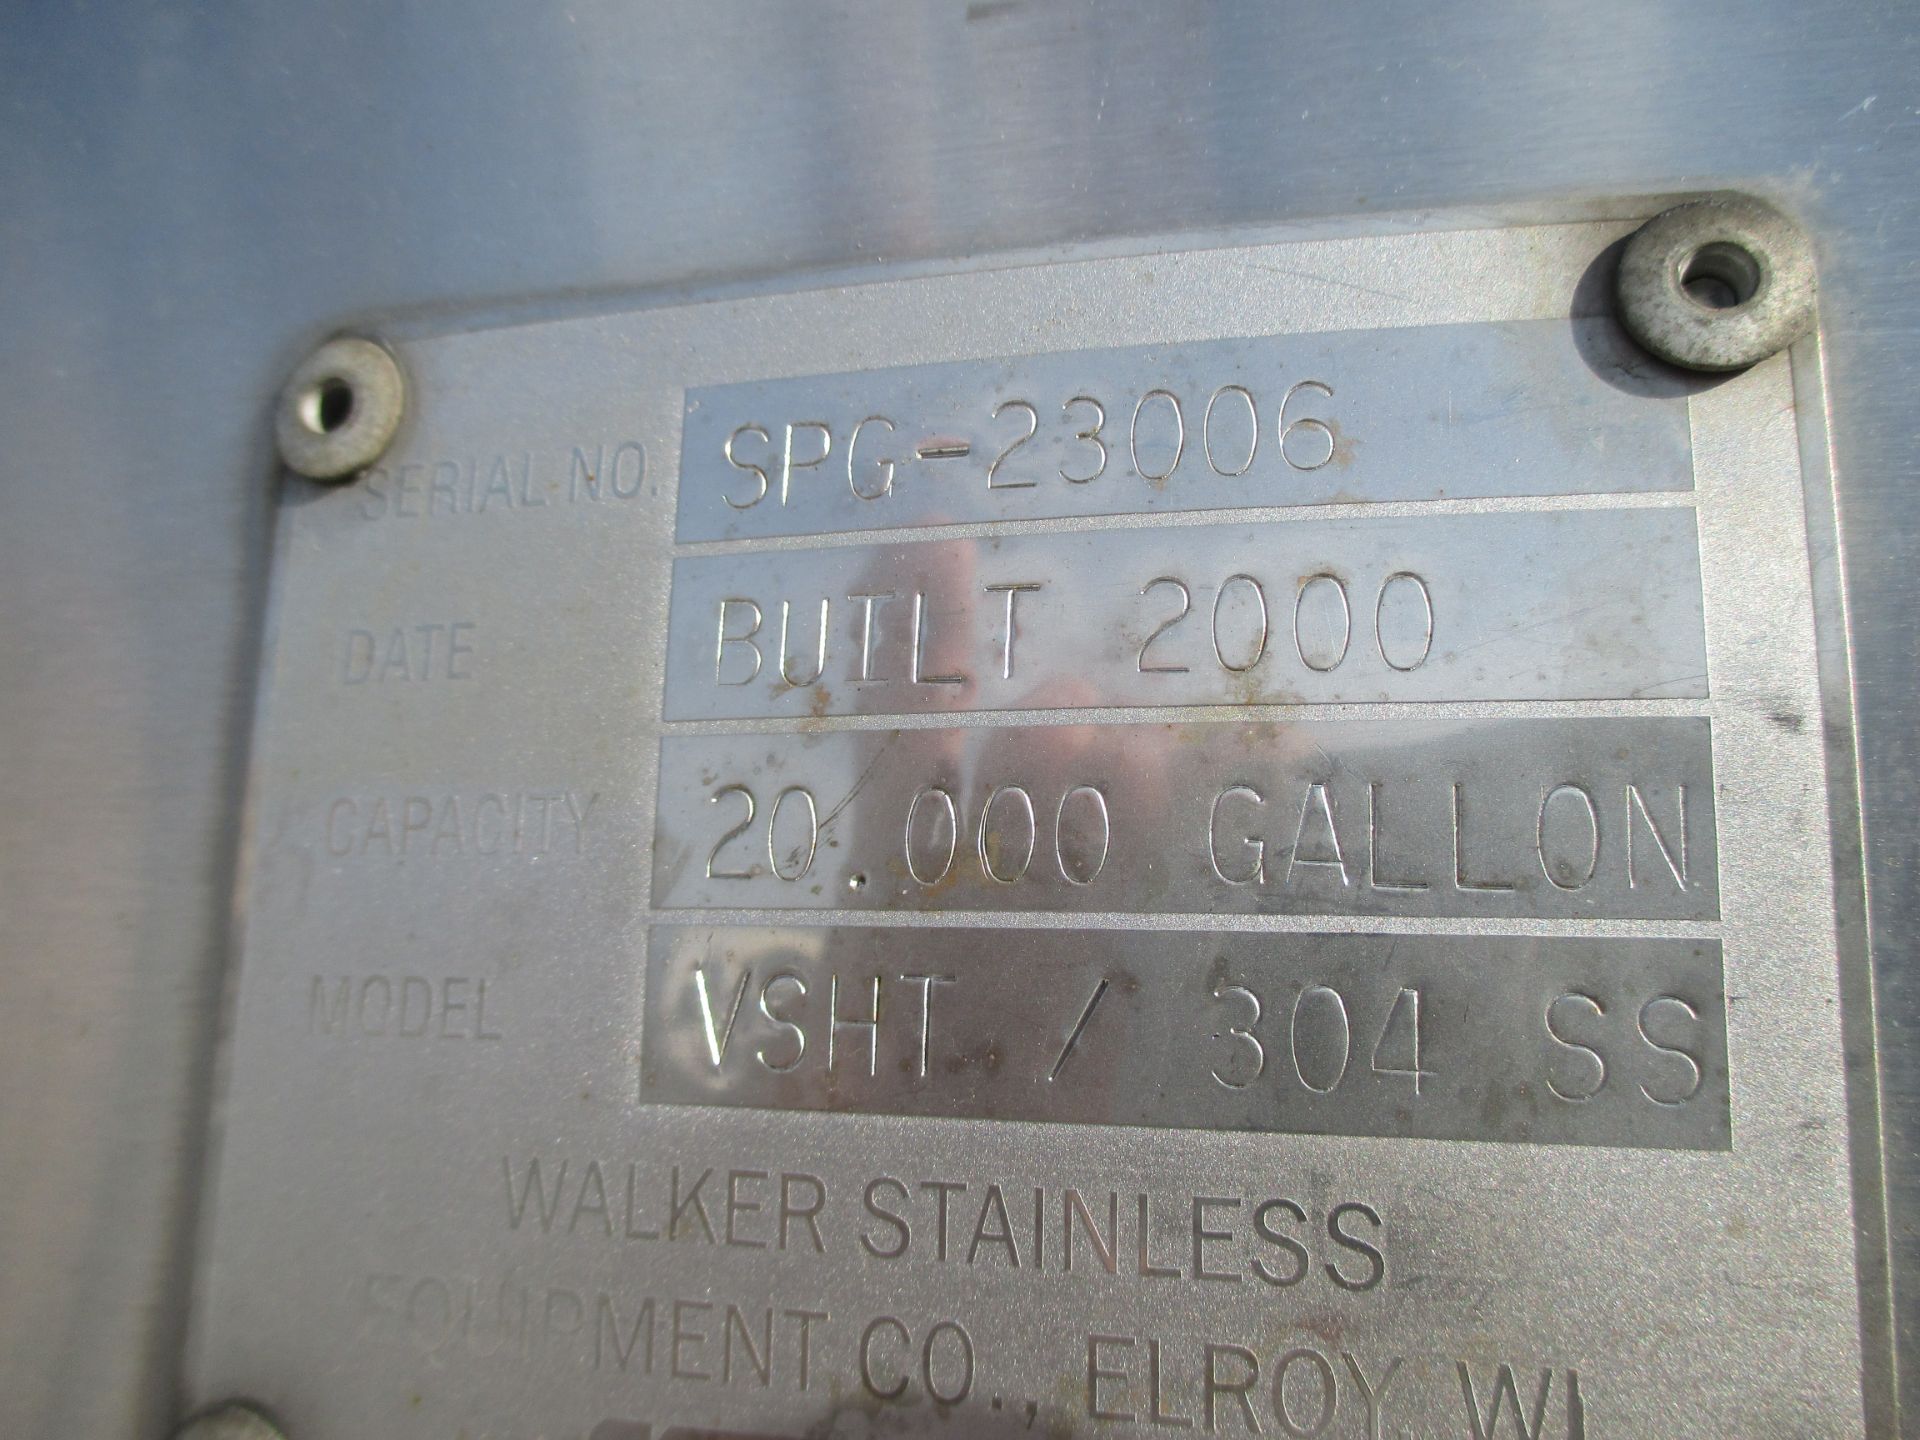 Walker 20,000 Gal. Insulated Silo, M/N VSHT/304 S.S., S/N SPG-23006, with S/S Exterior, Horizontal A - Image 3 of 7